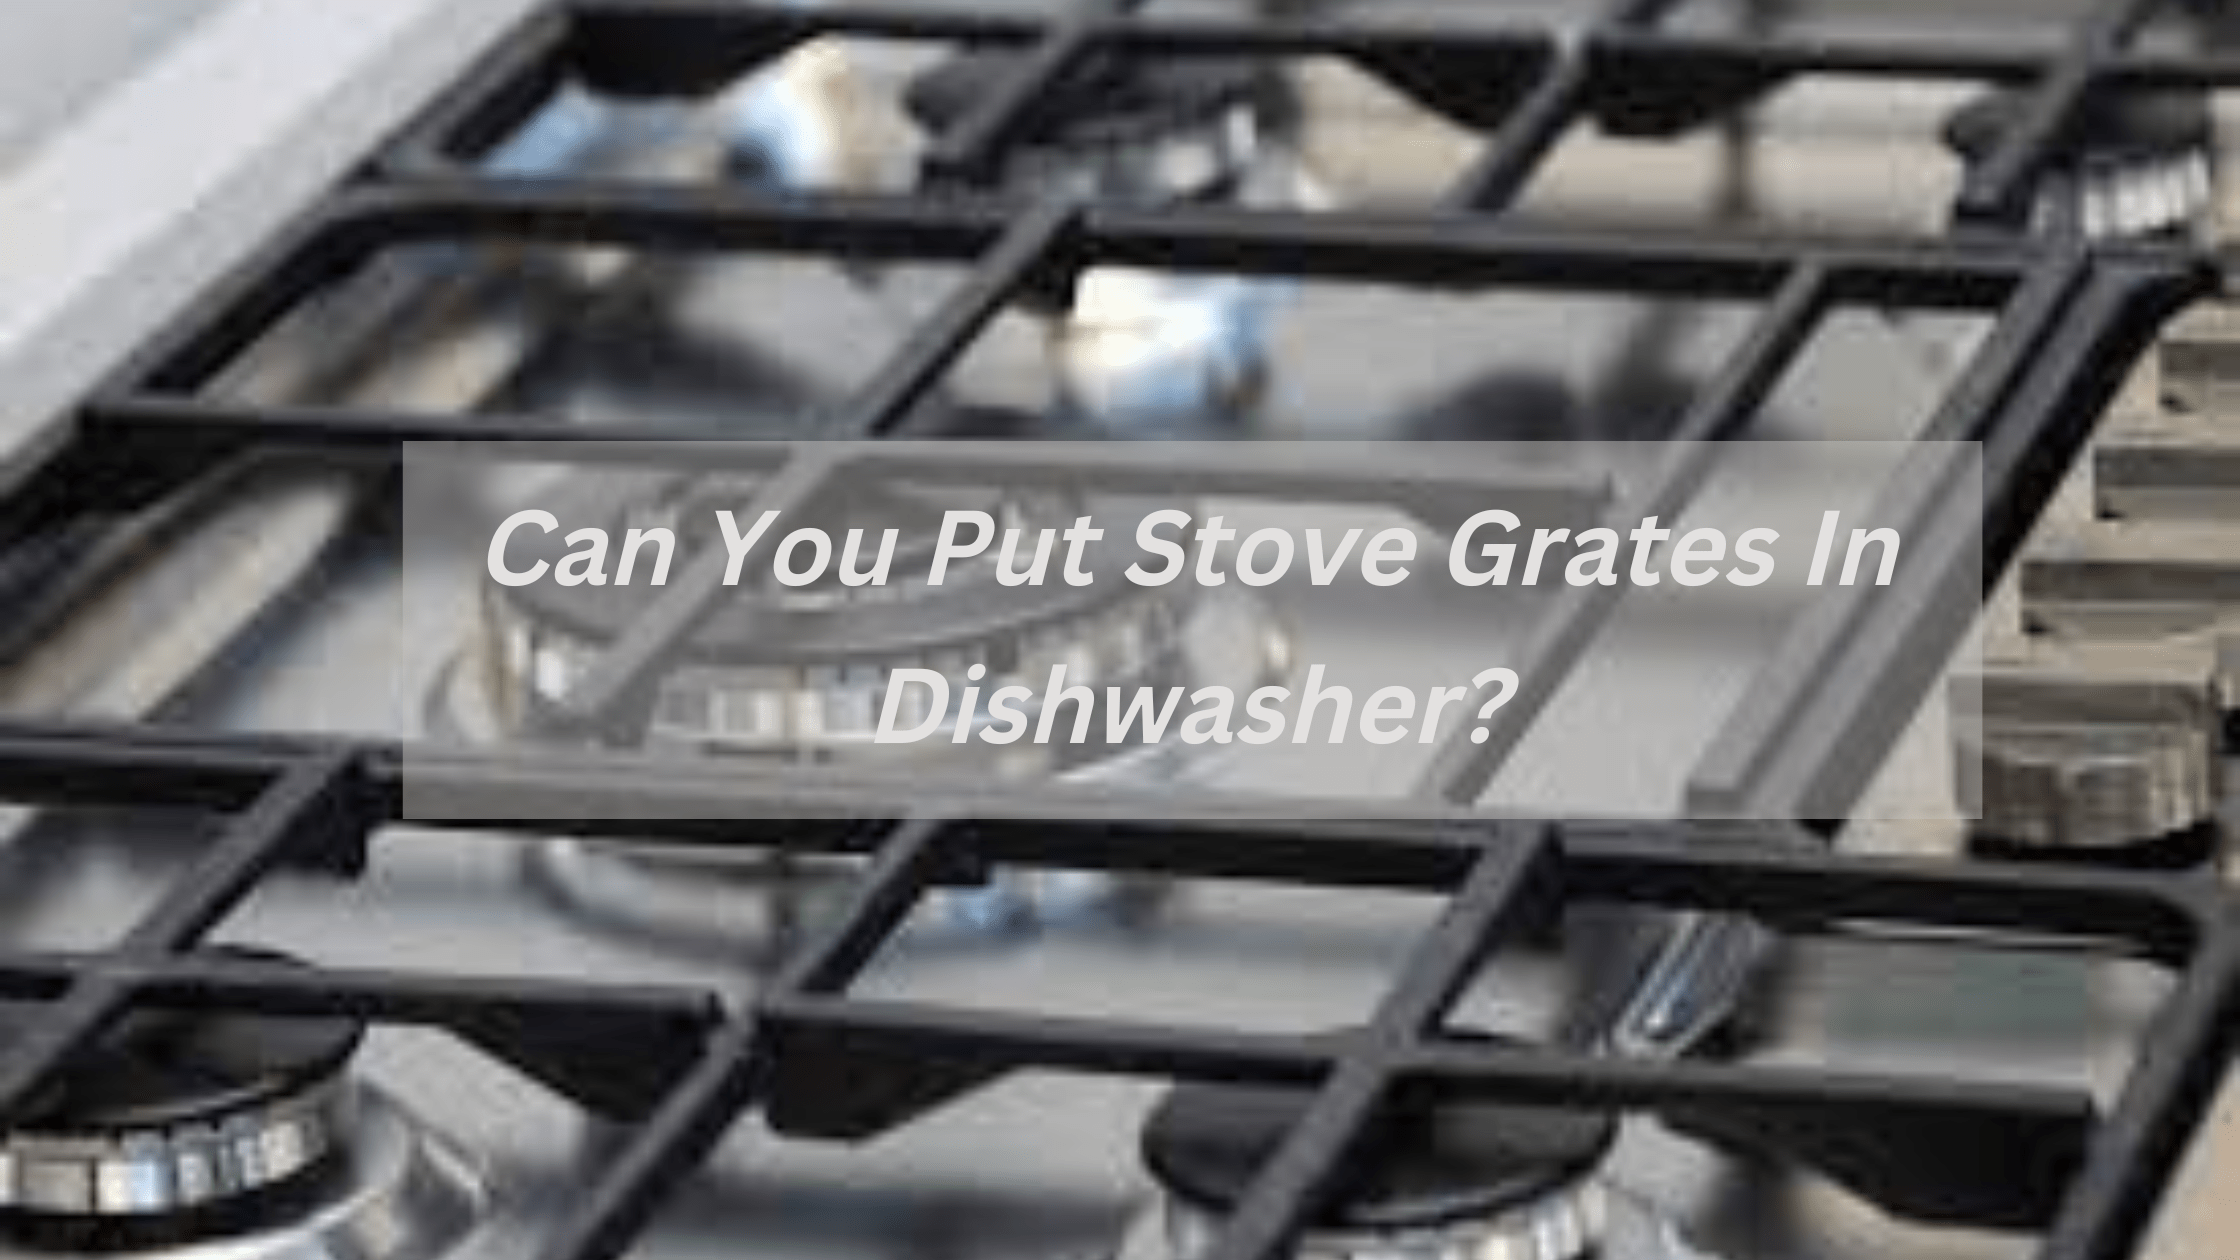 Can You Put Stove Grates In Dishwasher?